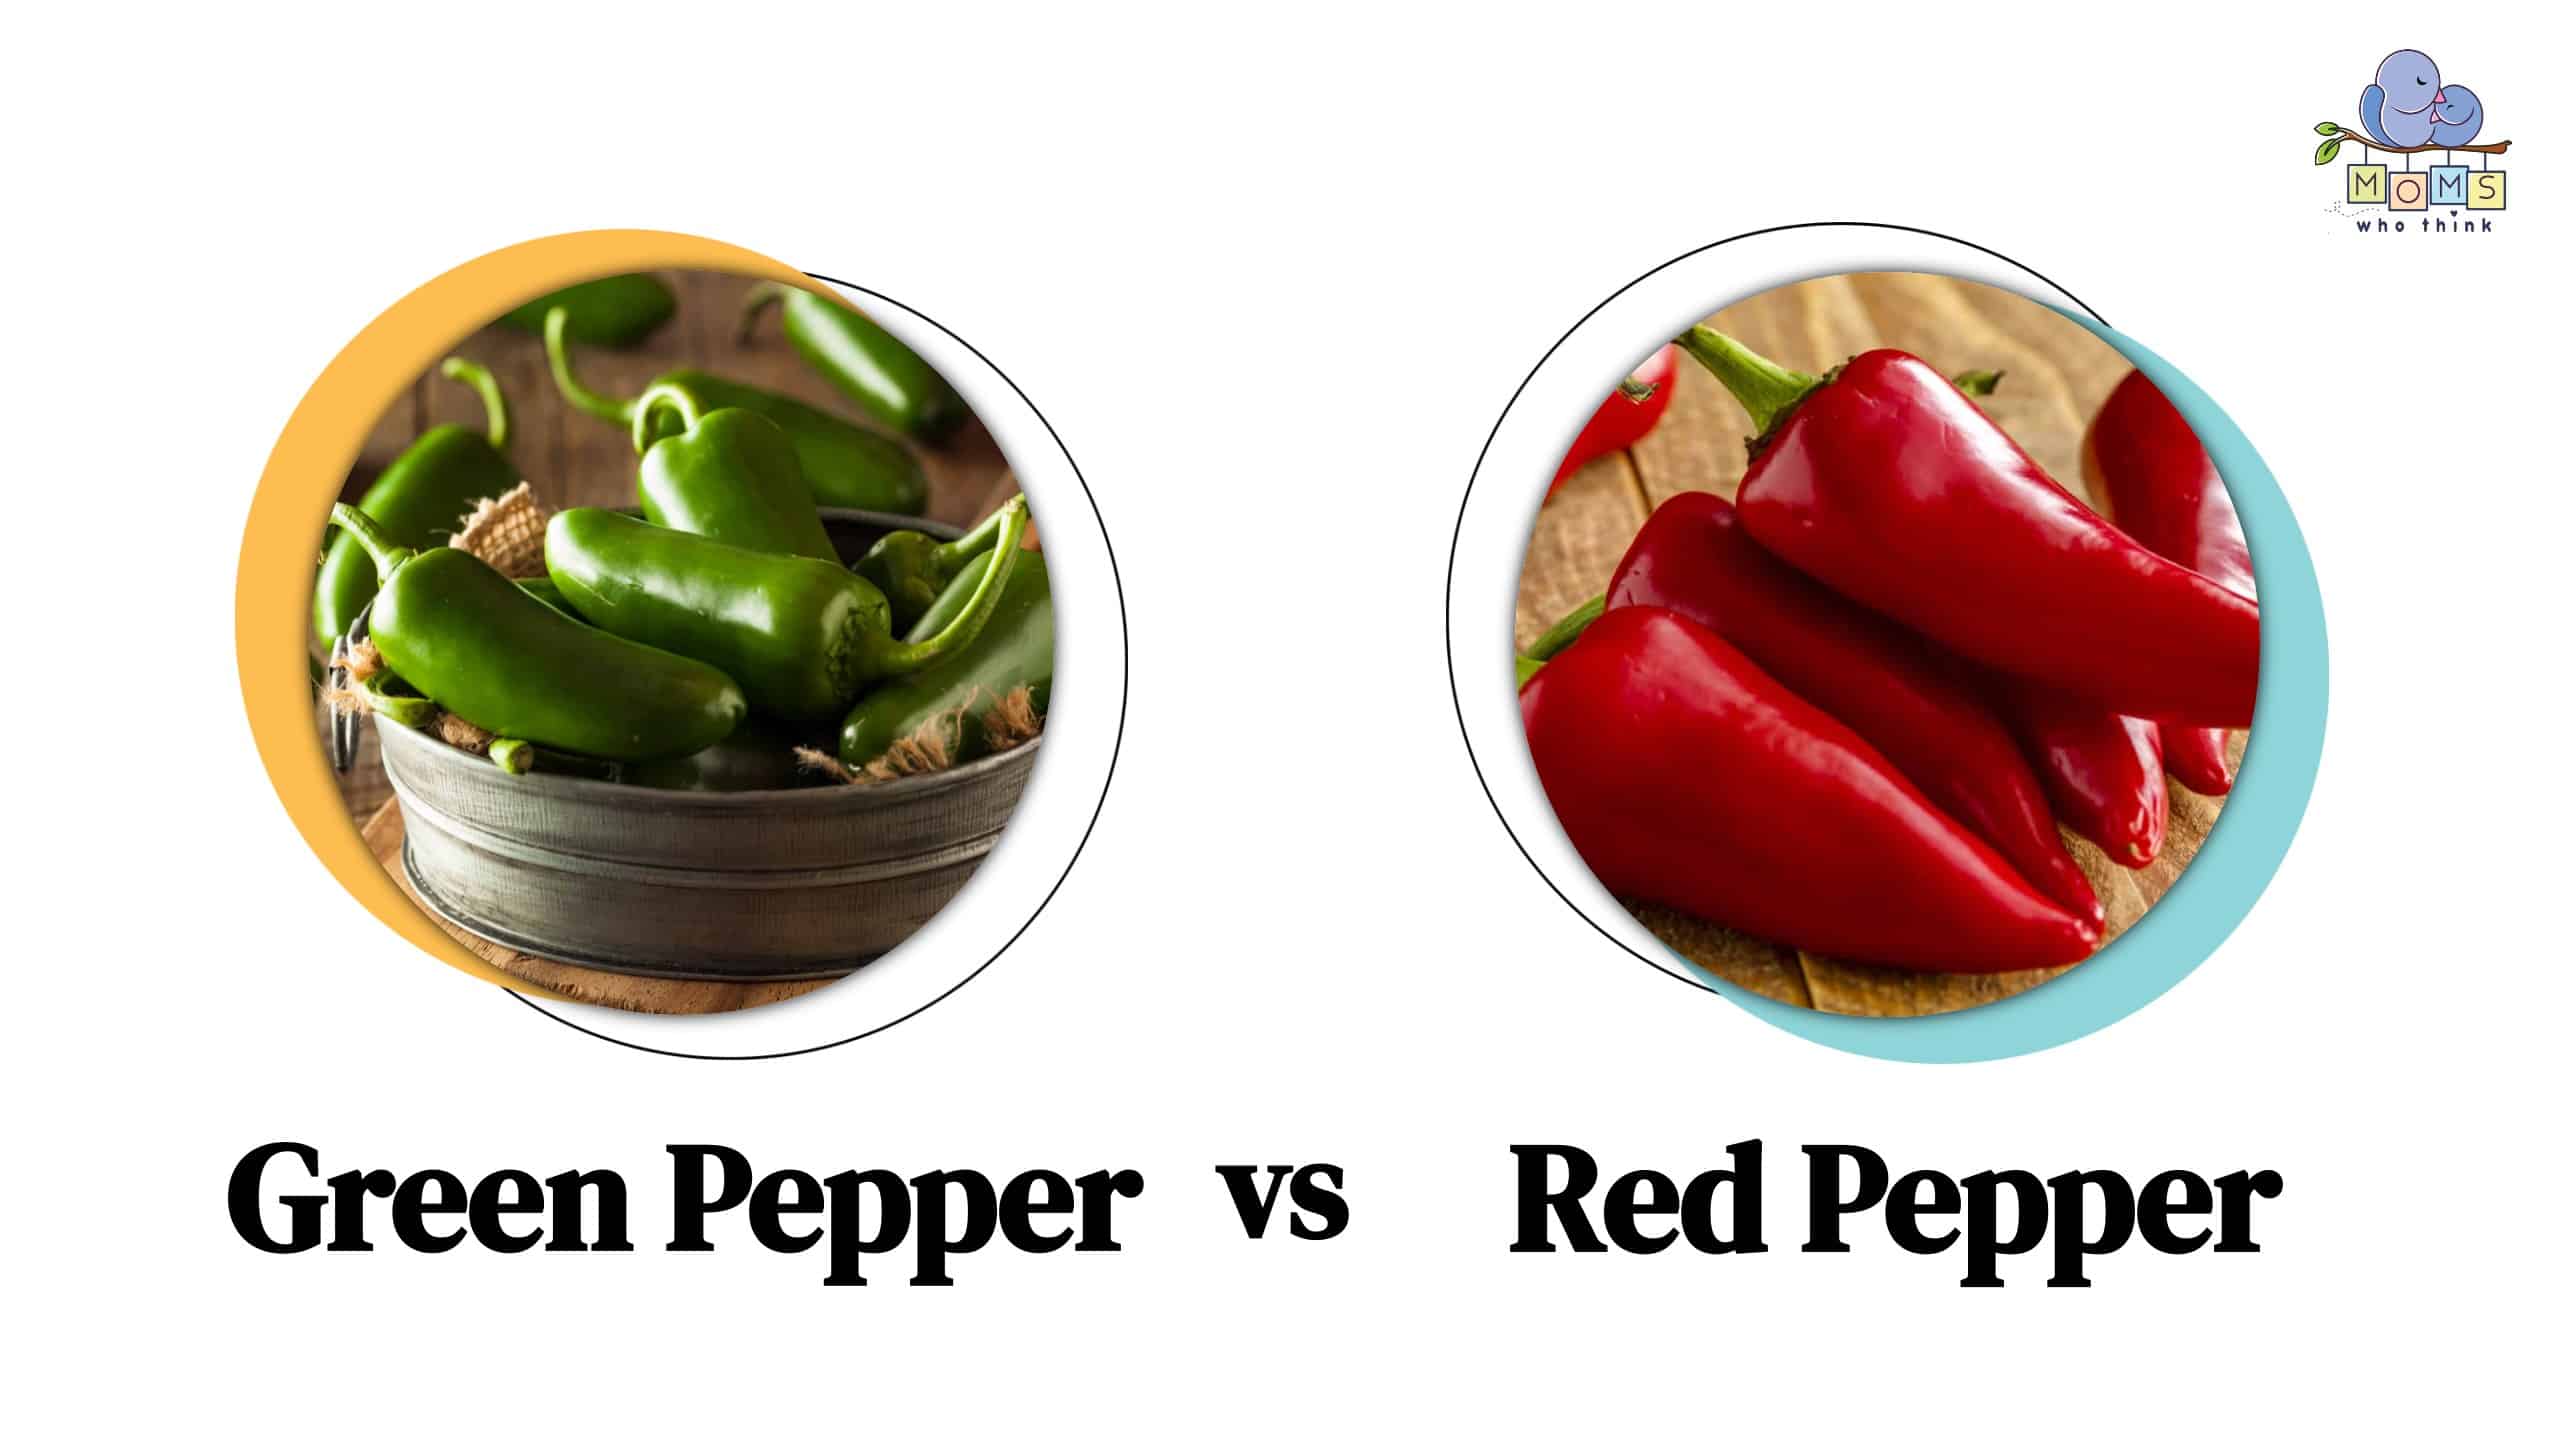 Bell Peppers, Green, Choice